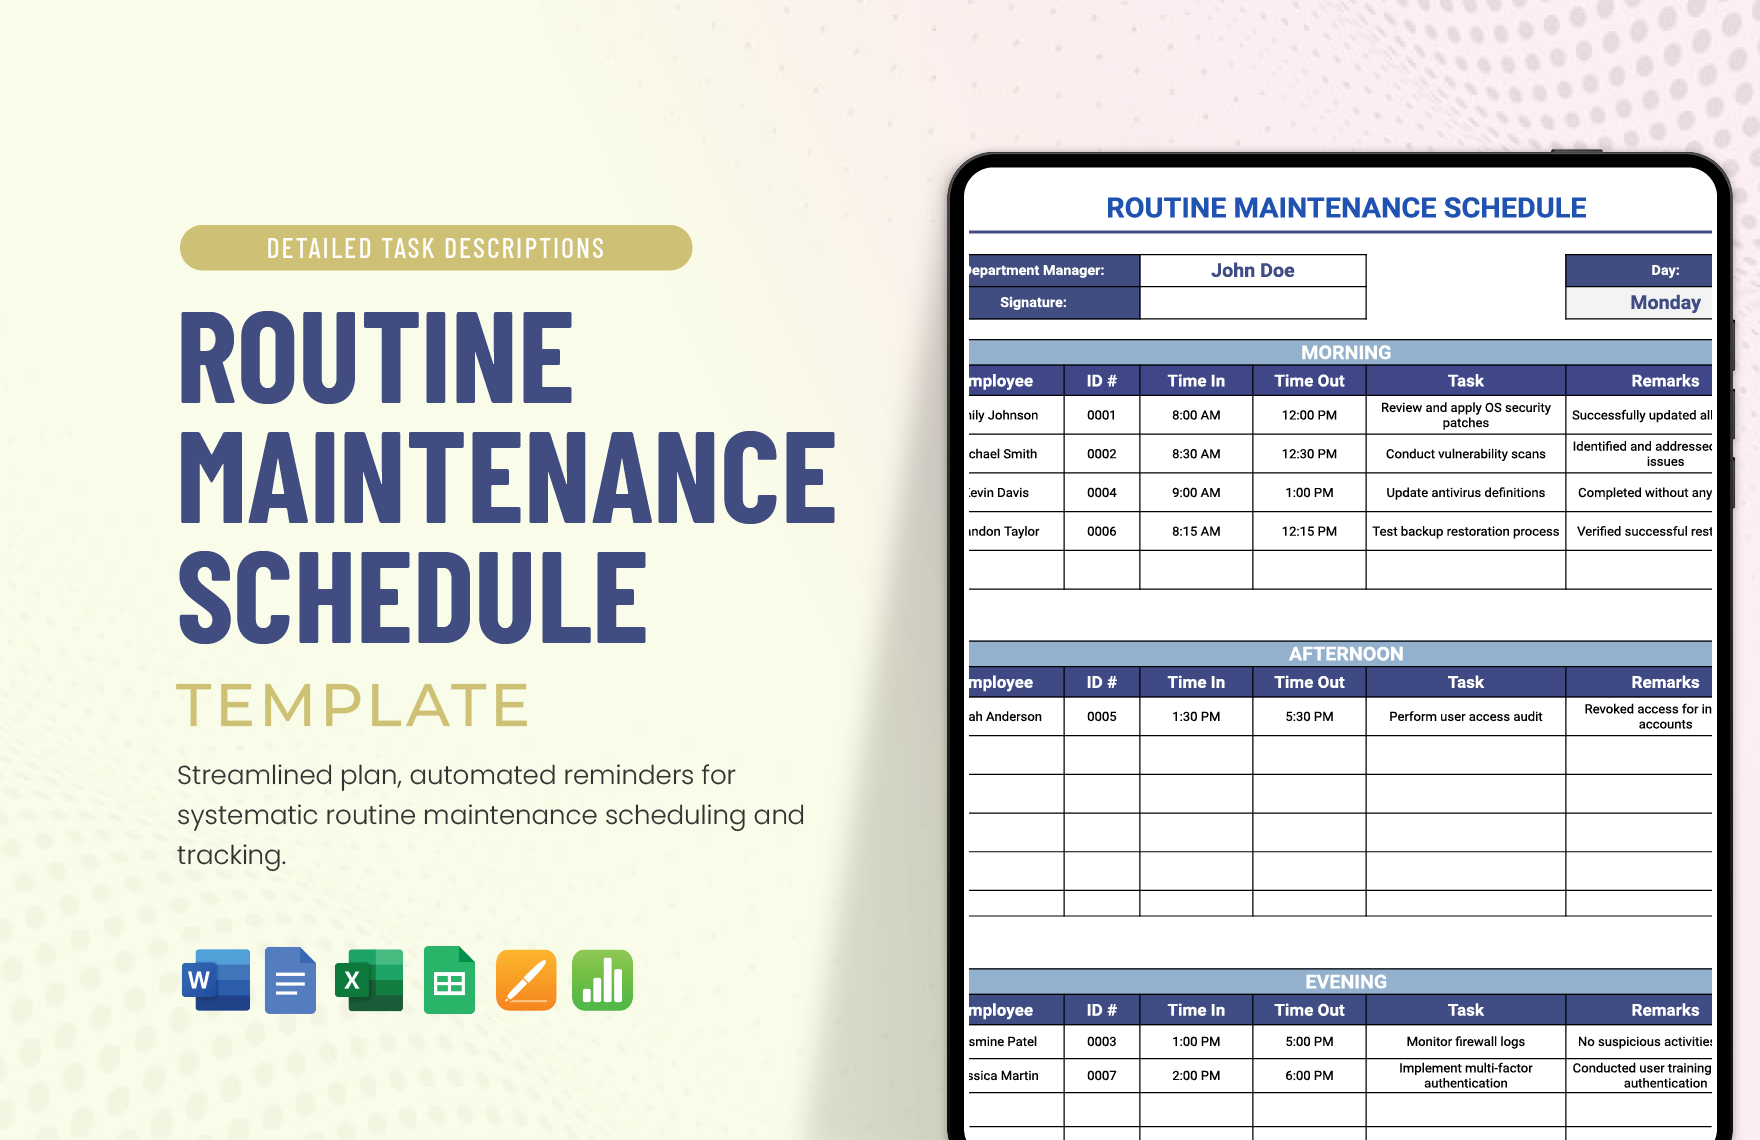 Routine Maintenance Schedule Template in Word, Google Docs, Excel, Google Sheets, Apple Pages, Apple Numbers